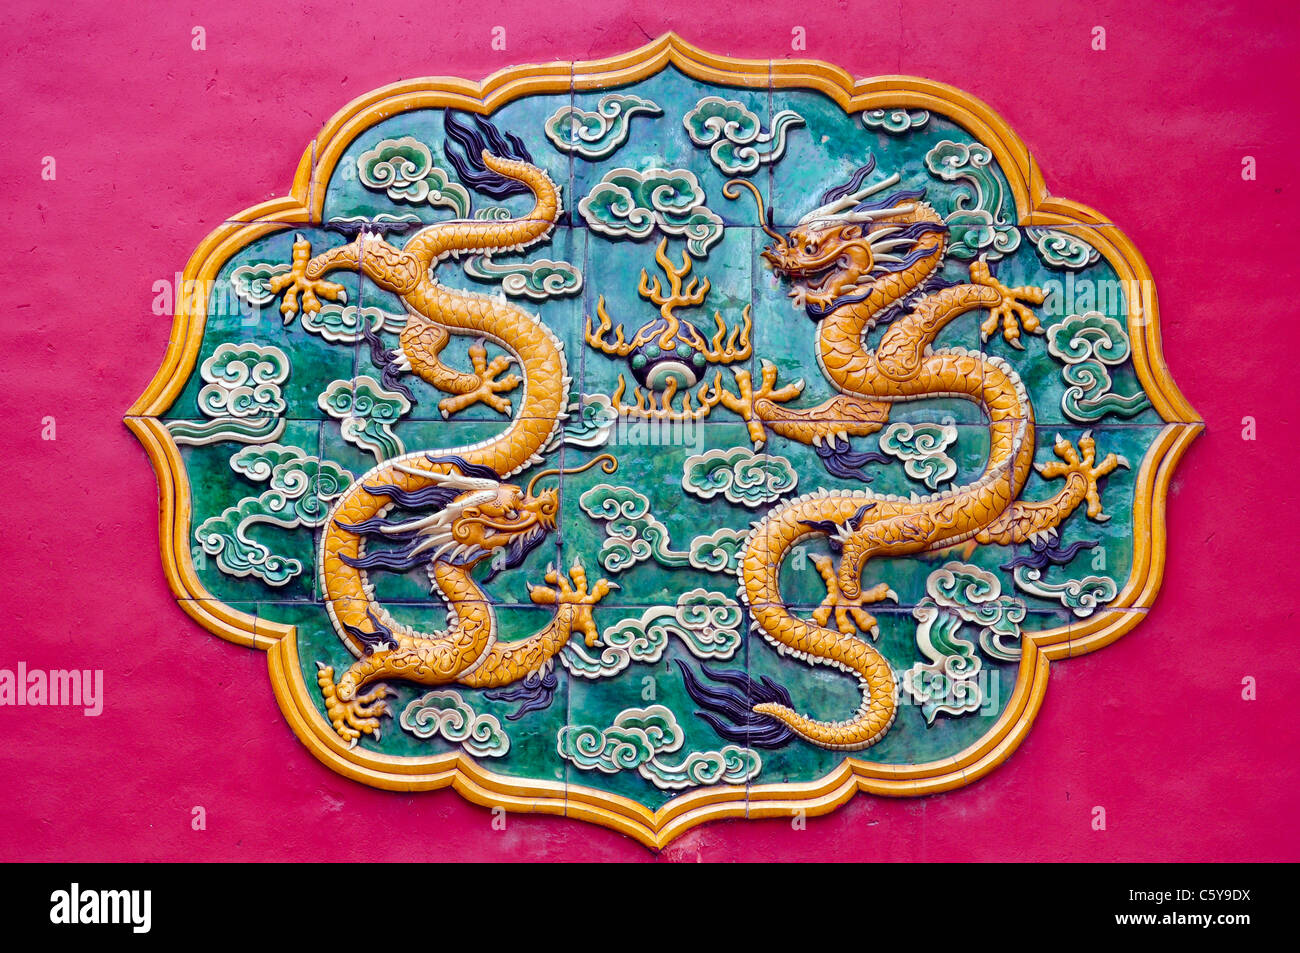 colorful chinese dragon ornament found in beijing's forbidden city Stock Photo